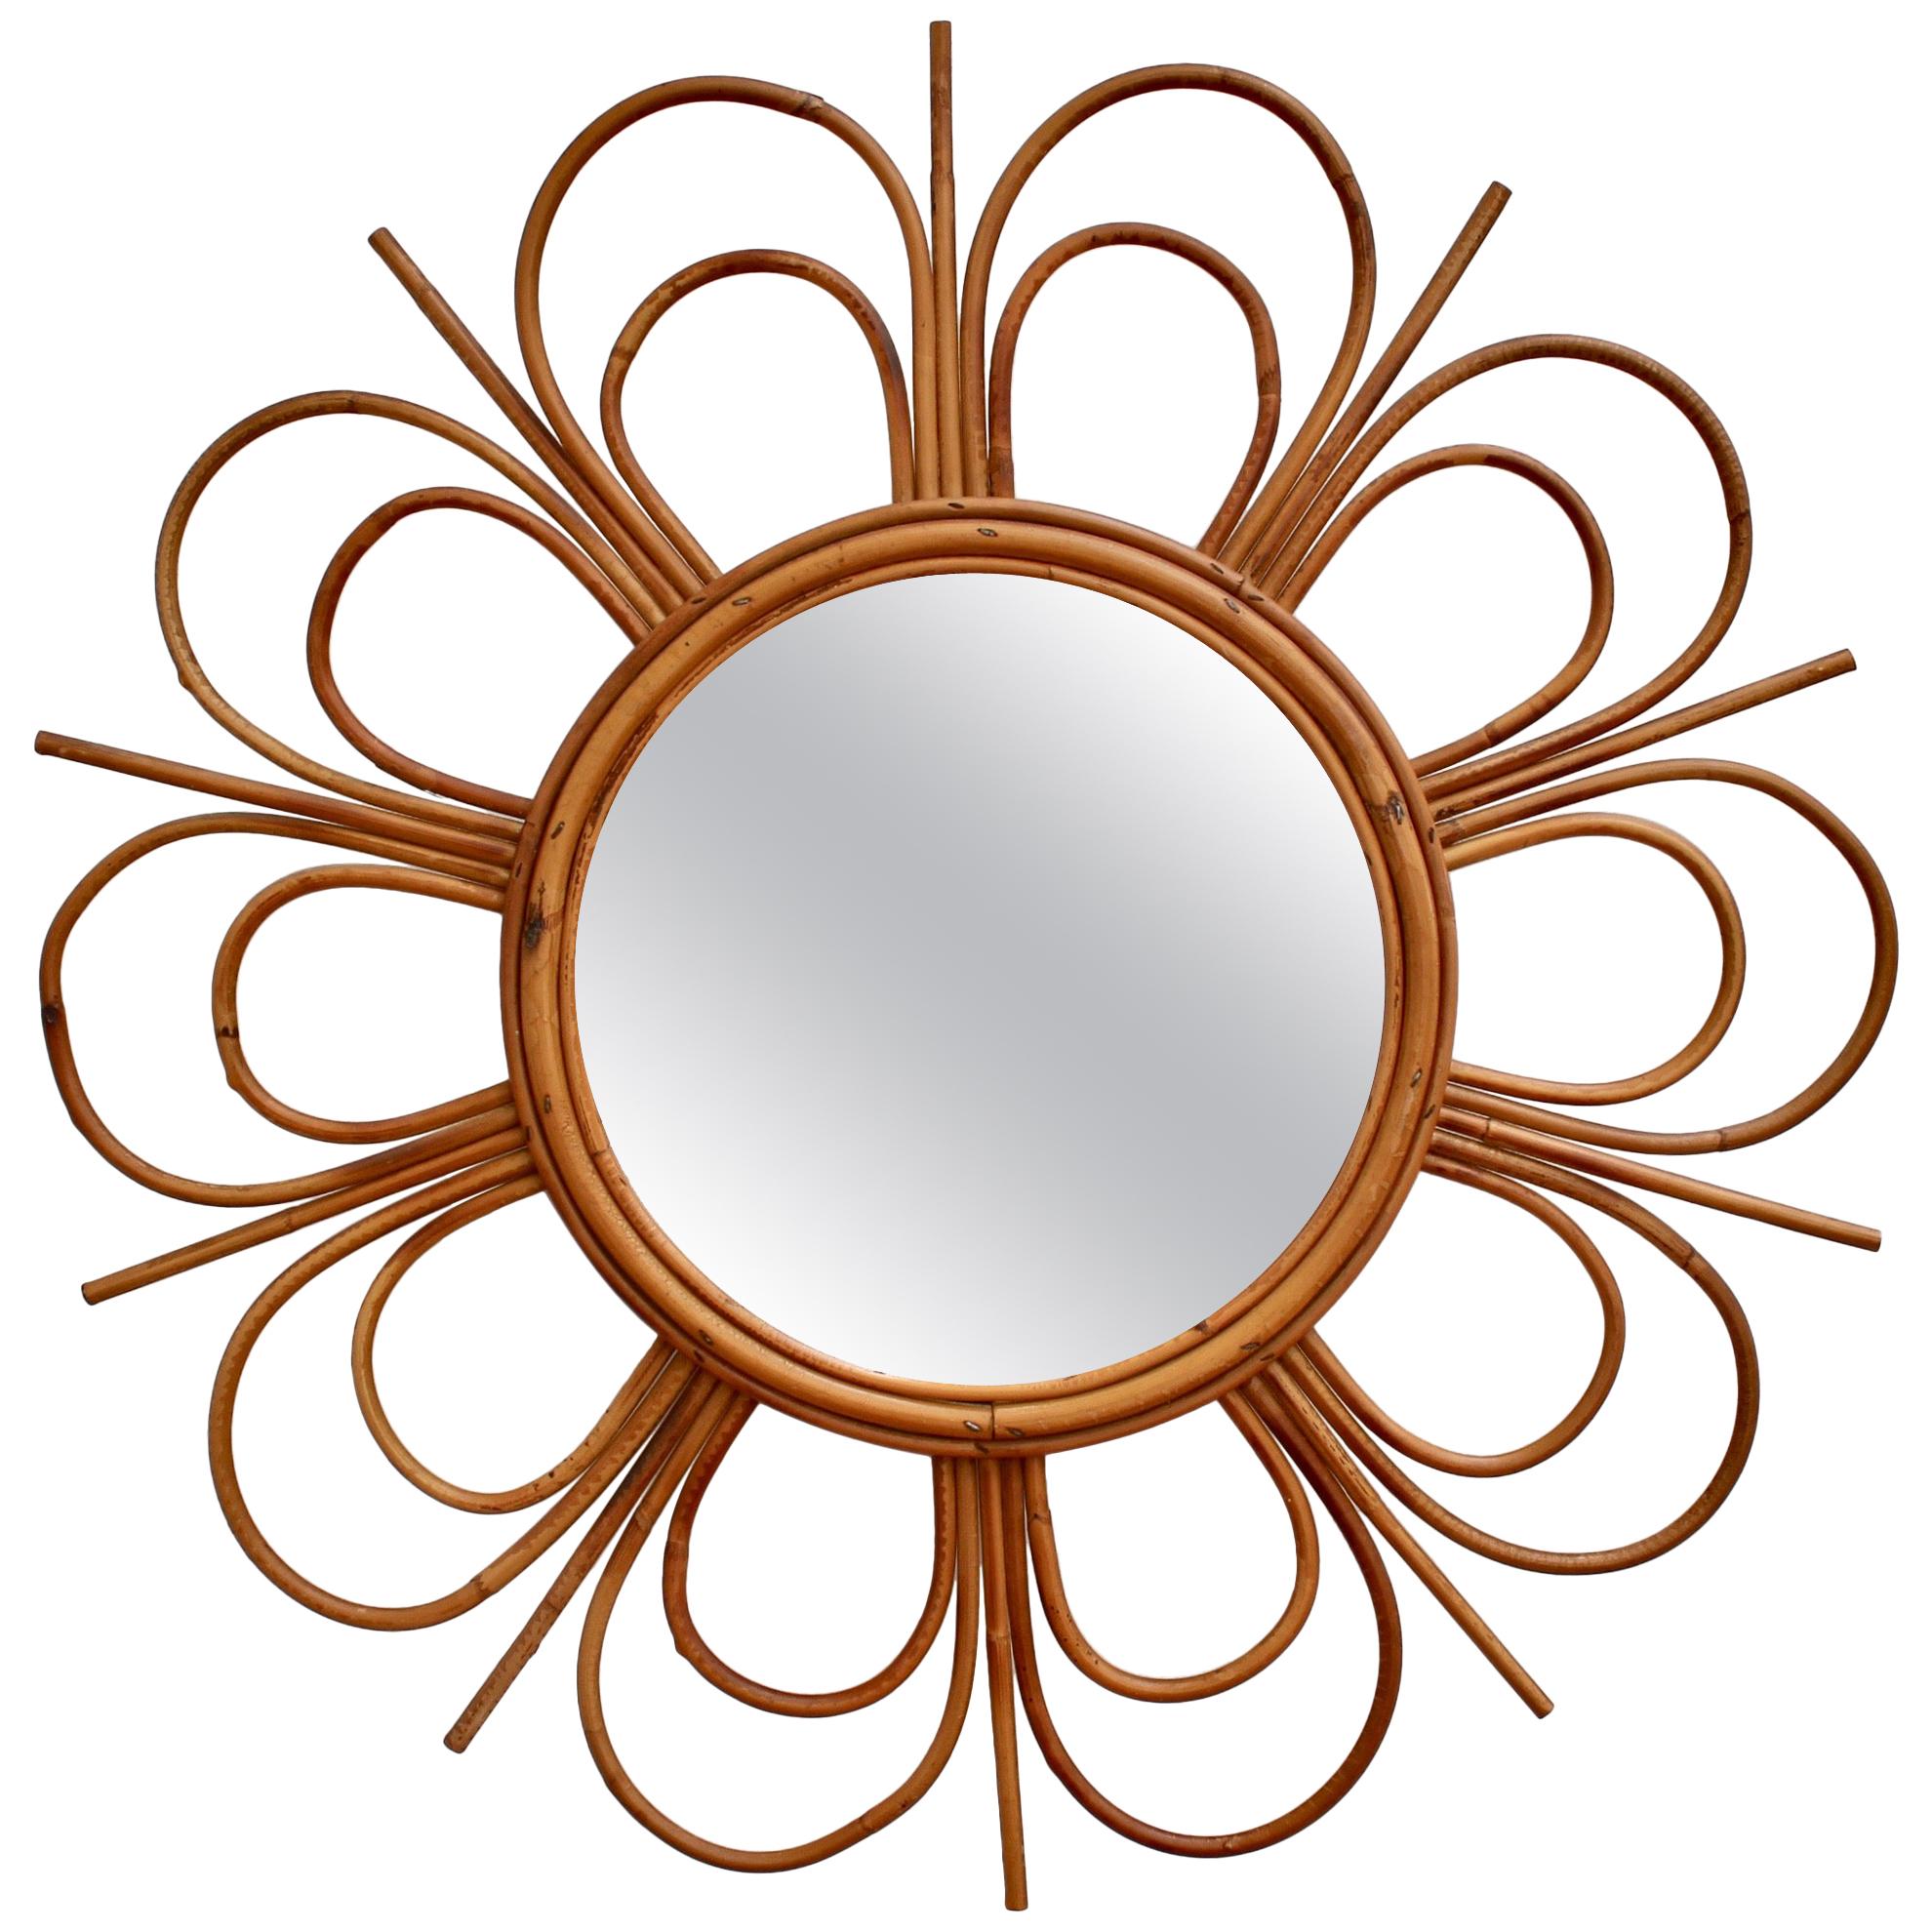 Midcentury French Rattan Flower-Shaped Wall Mirror, circa 1960s